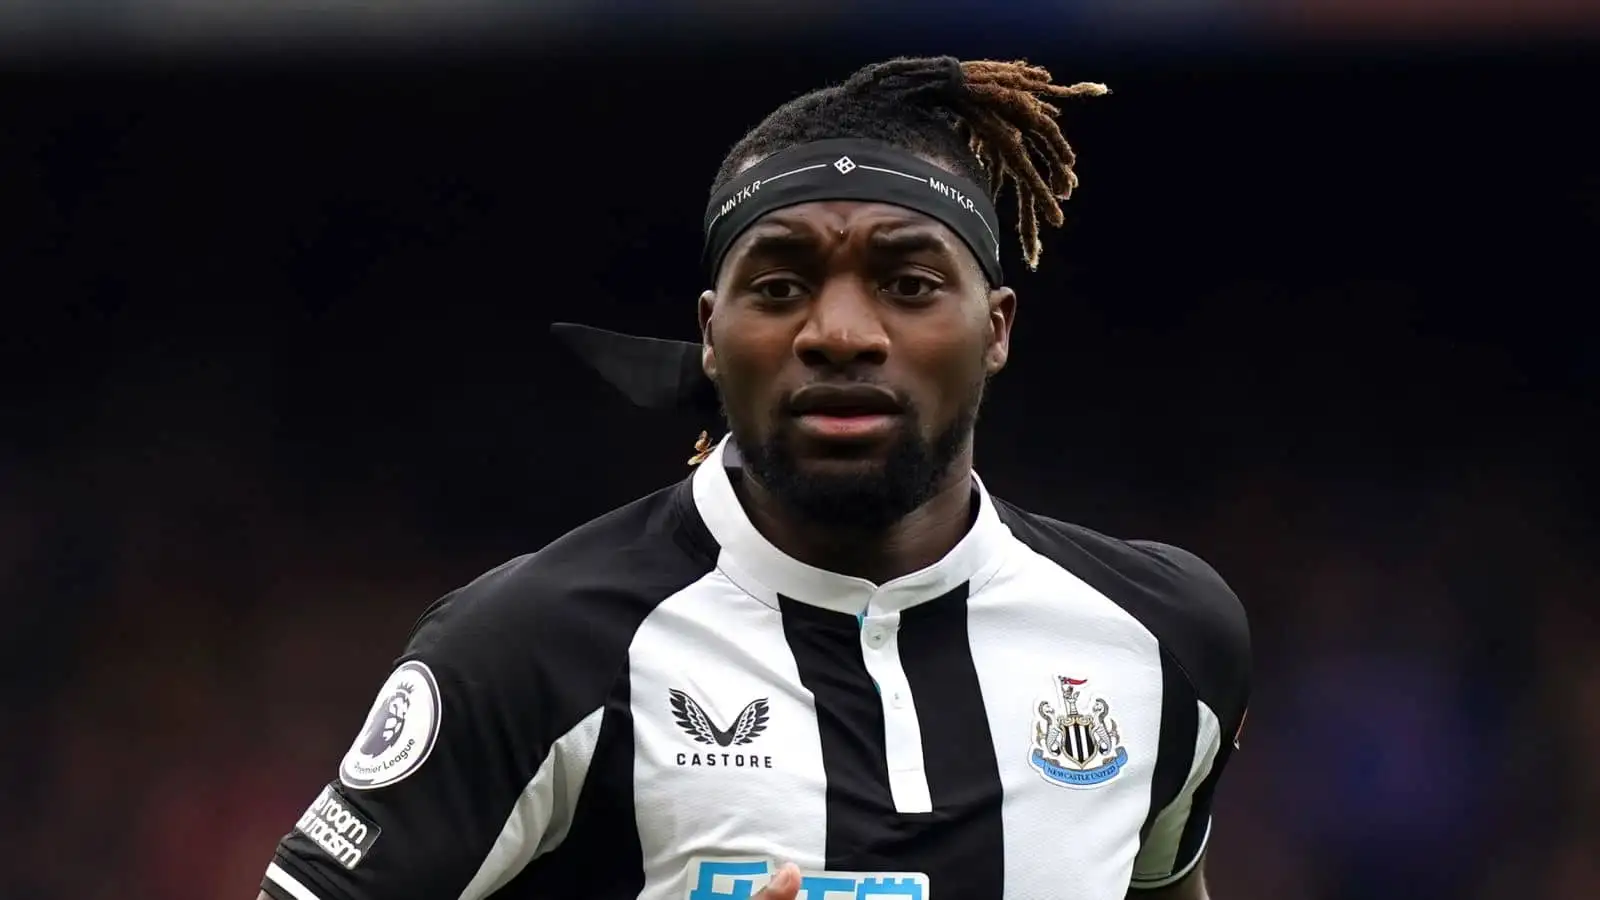 Allan Saint-Maximin in action for Newcastle during Premier League game v Chelsea at Stamford Bridge